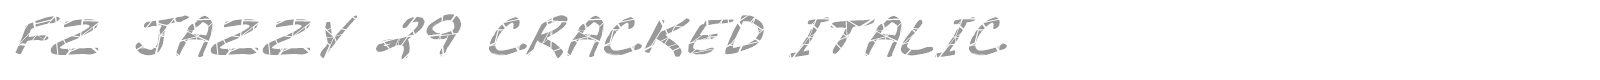 FZ JAZZY 29 CRACKED ITALIC font preview